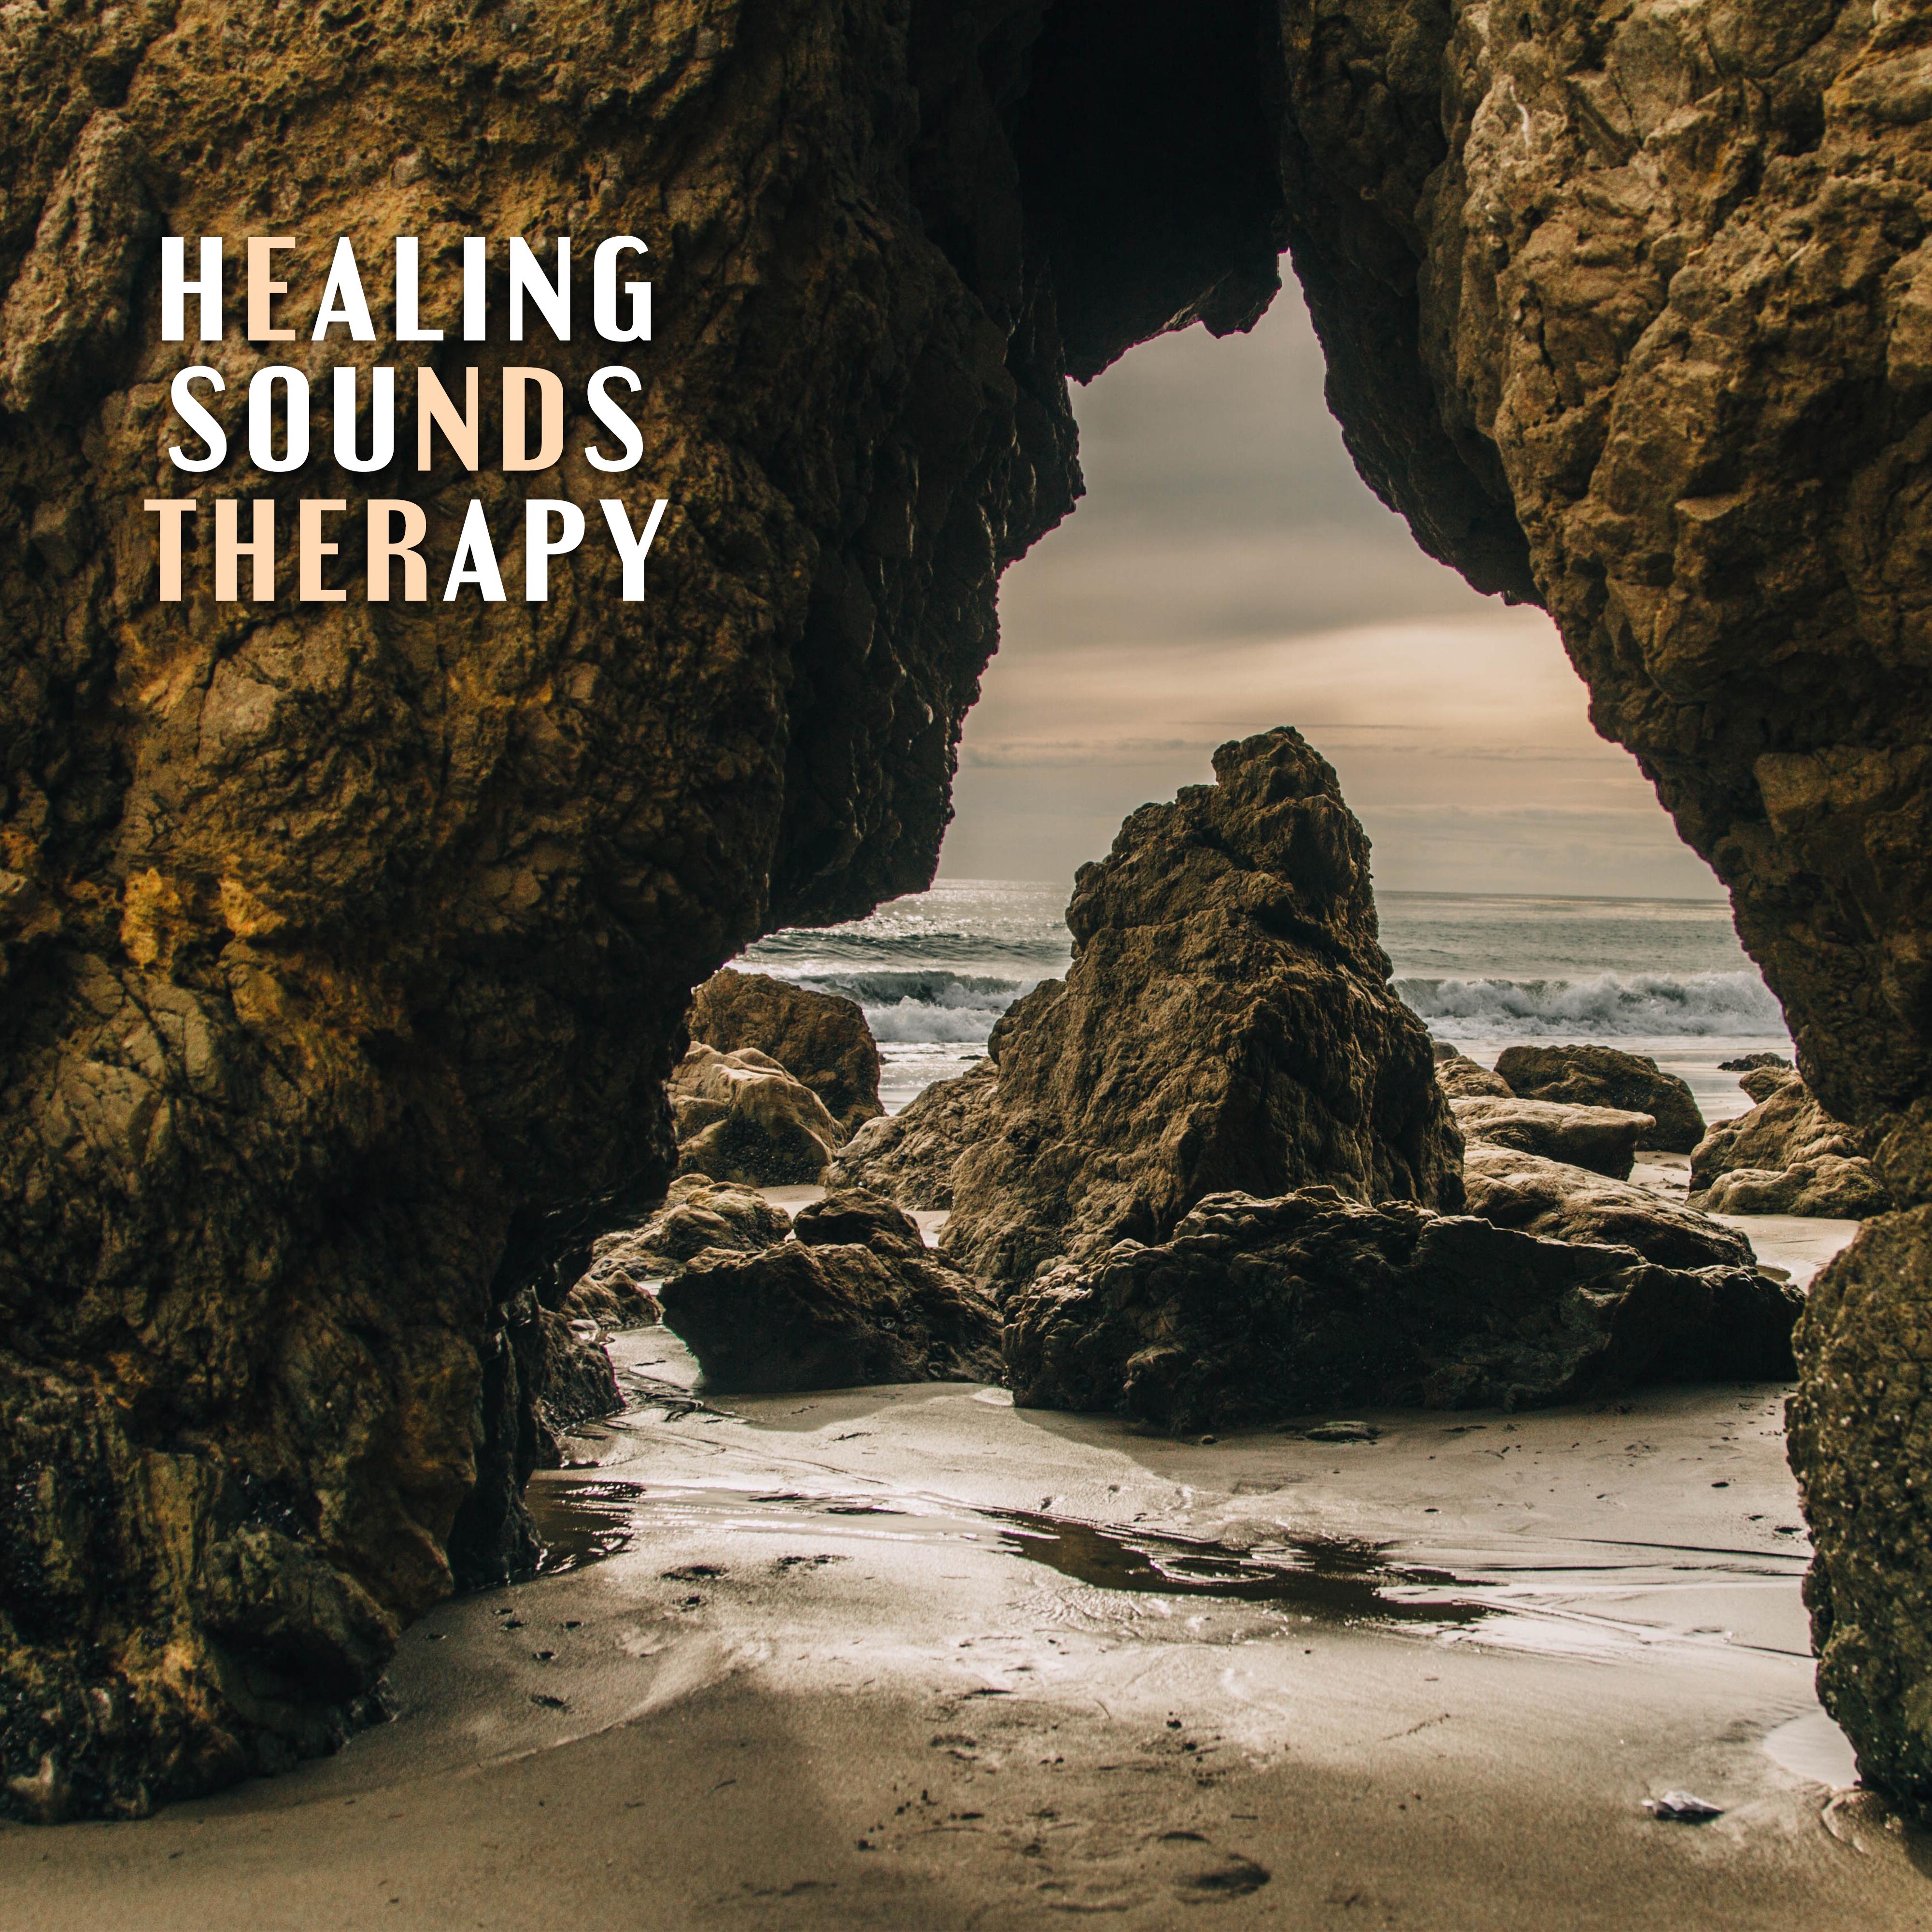 Healing Sounds Therapy – Pure Nature Sounds, Relaxing Music, New Age 2017, Spa & Wellness, Massage Background Music